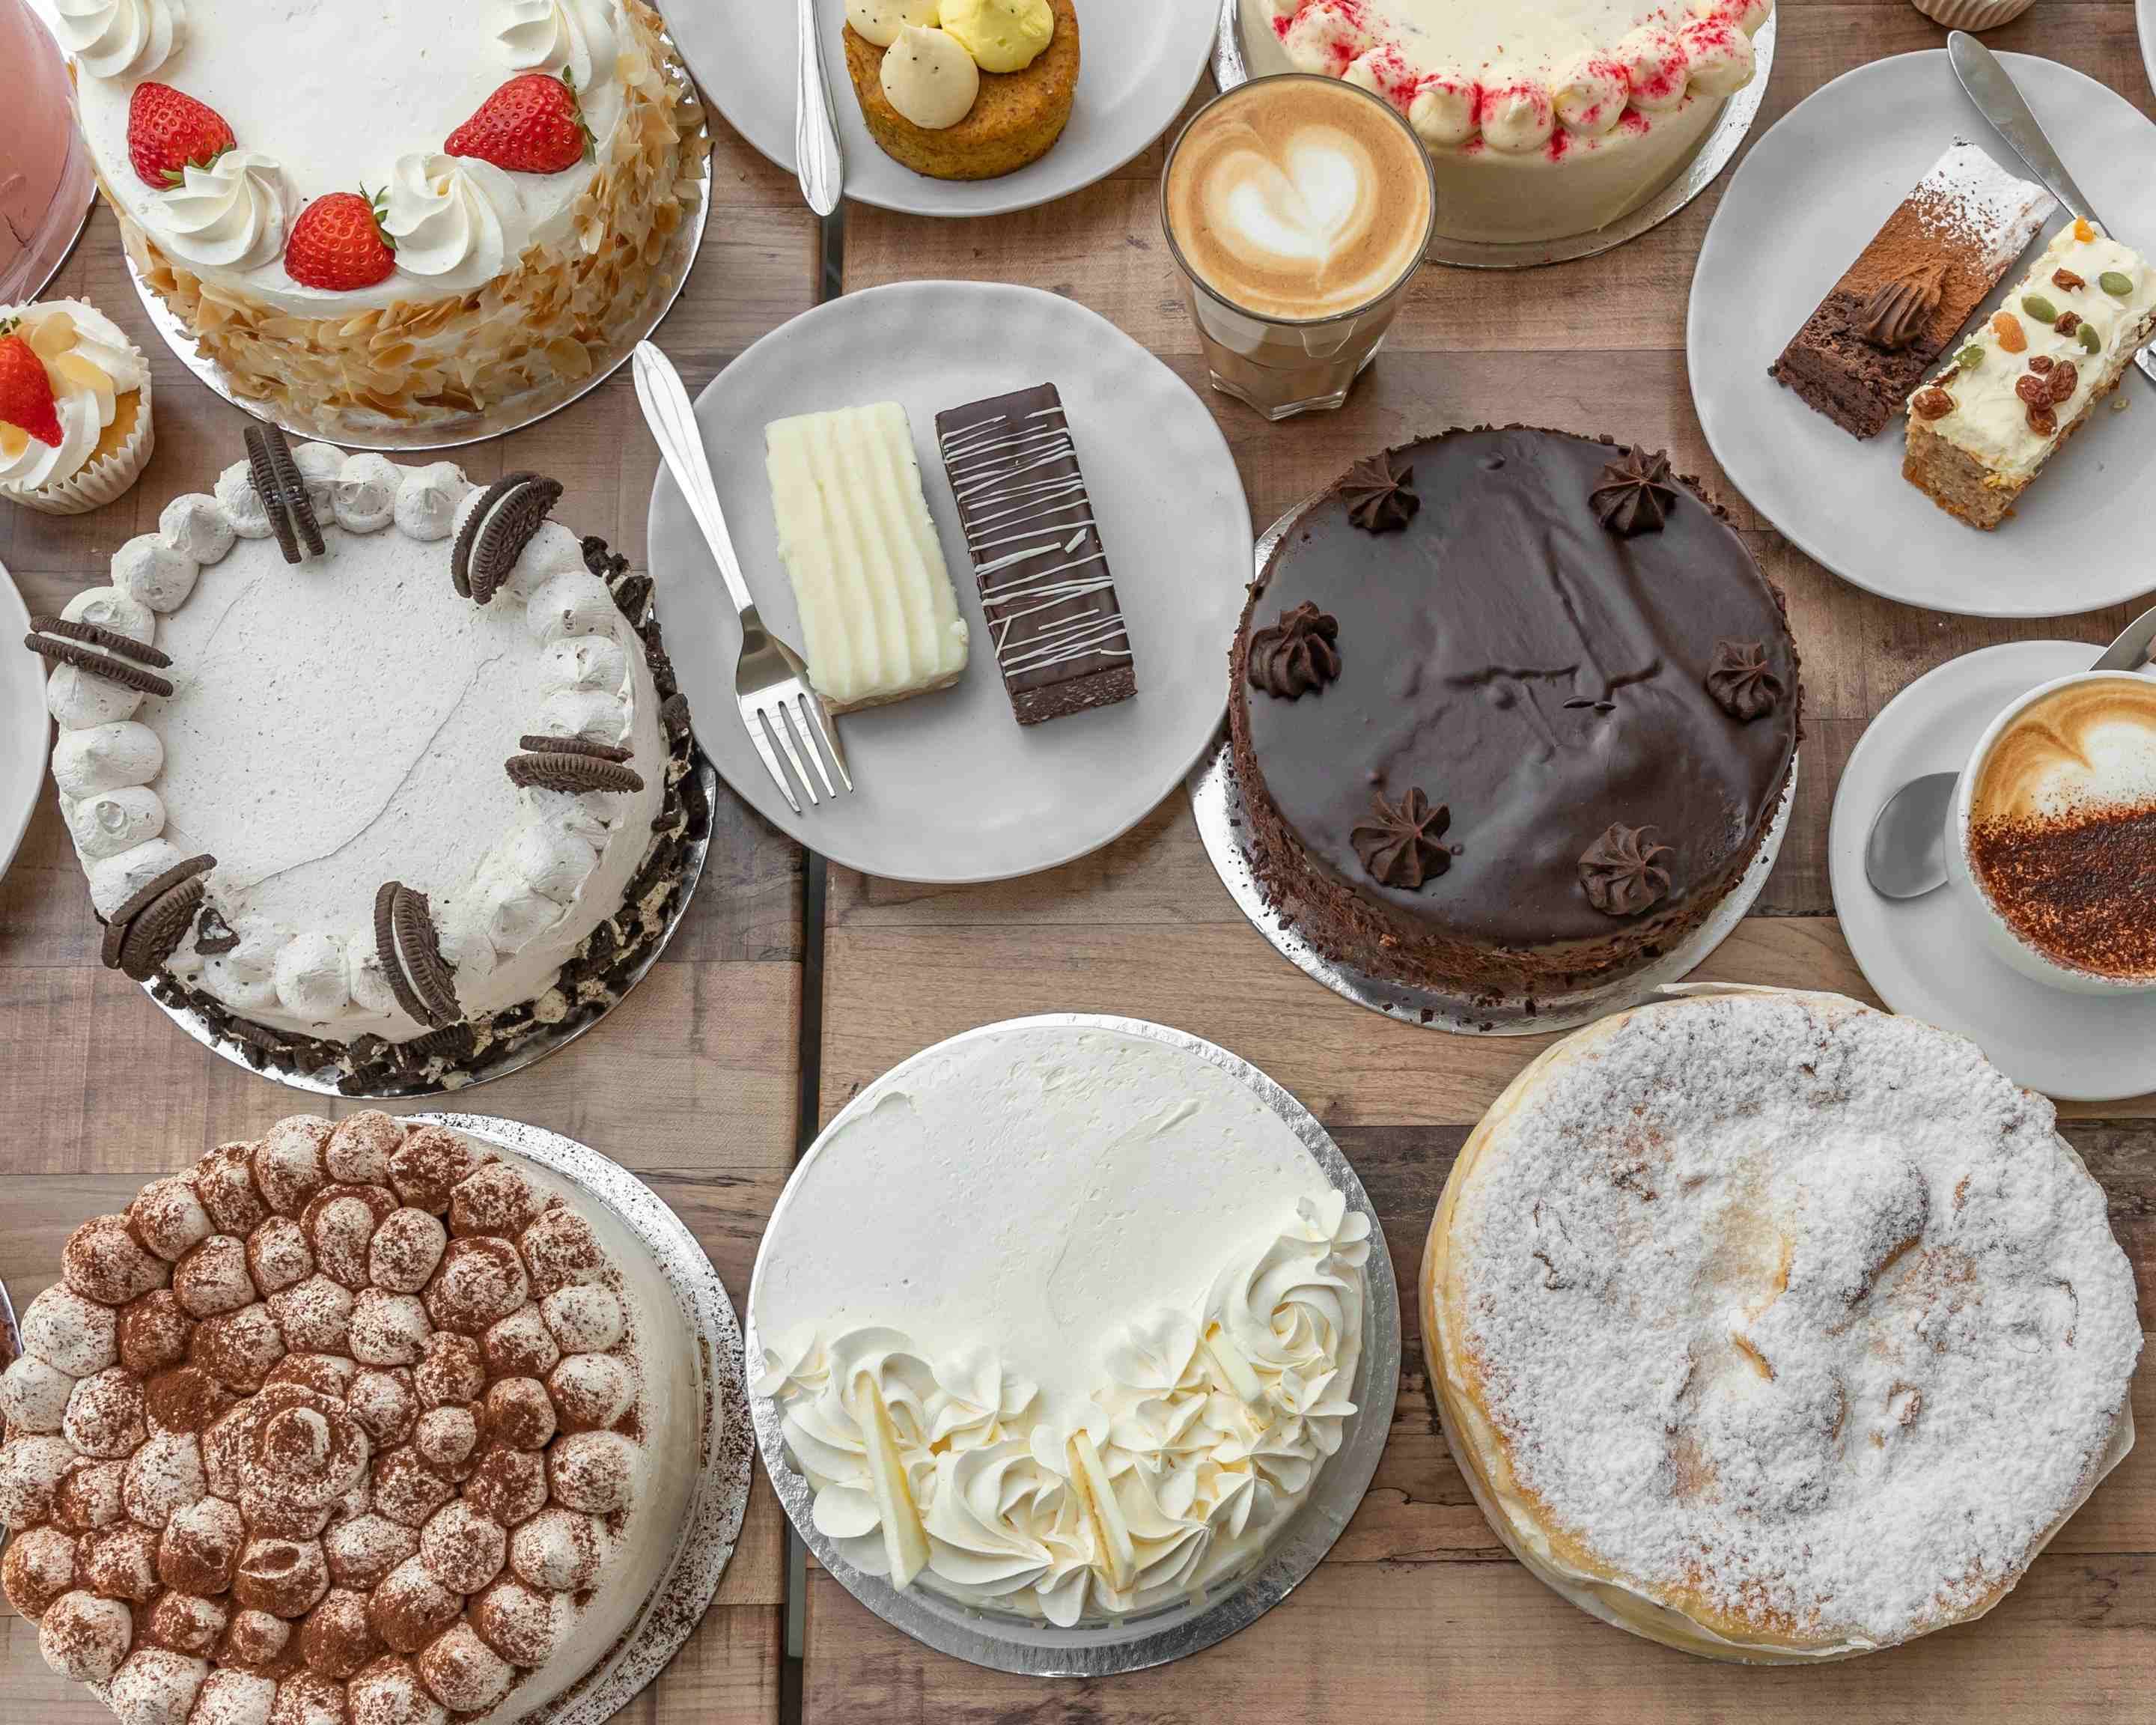 Wholesale Cakes for Cafes & Coffee Shops